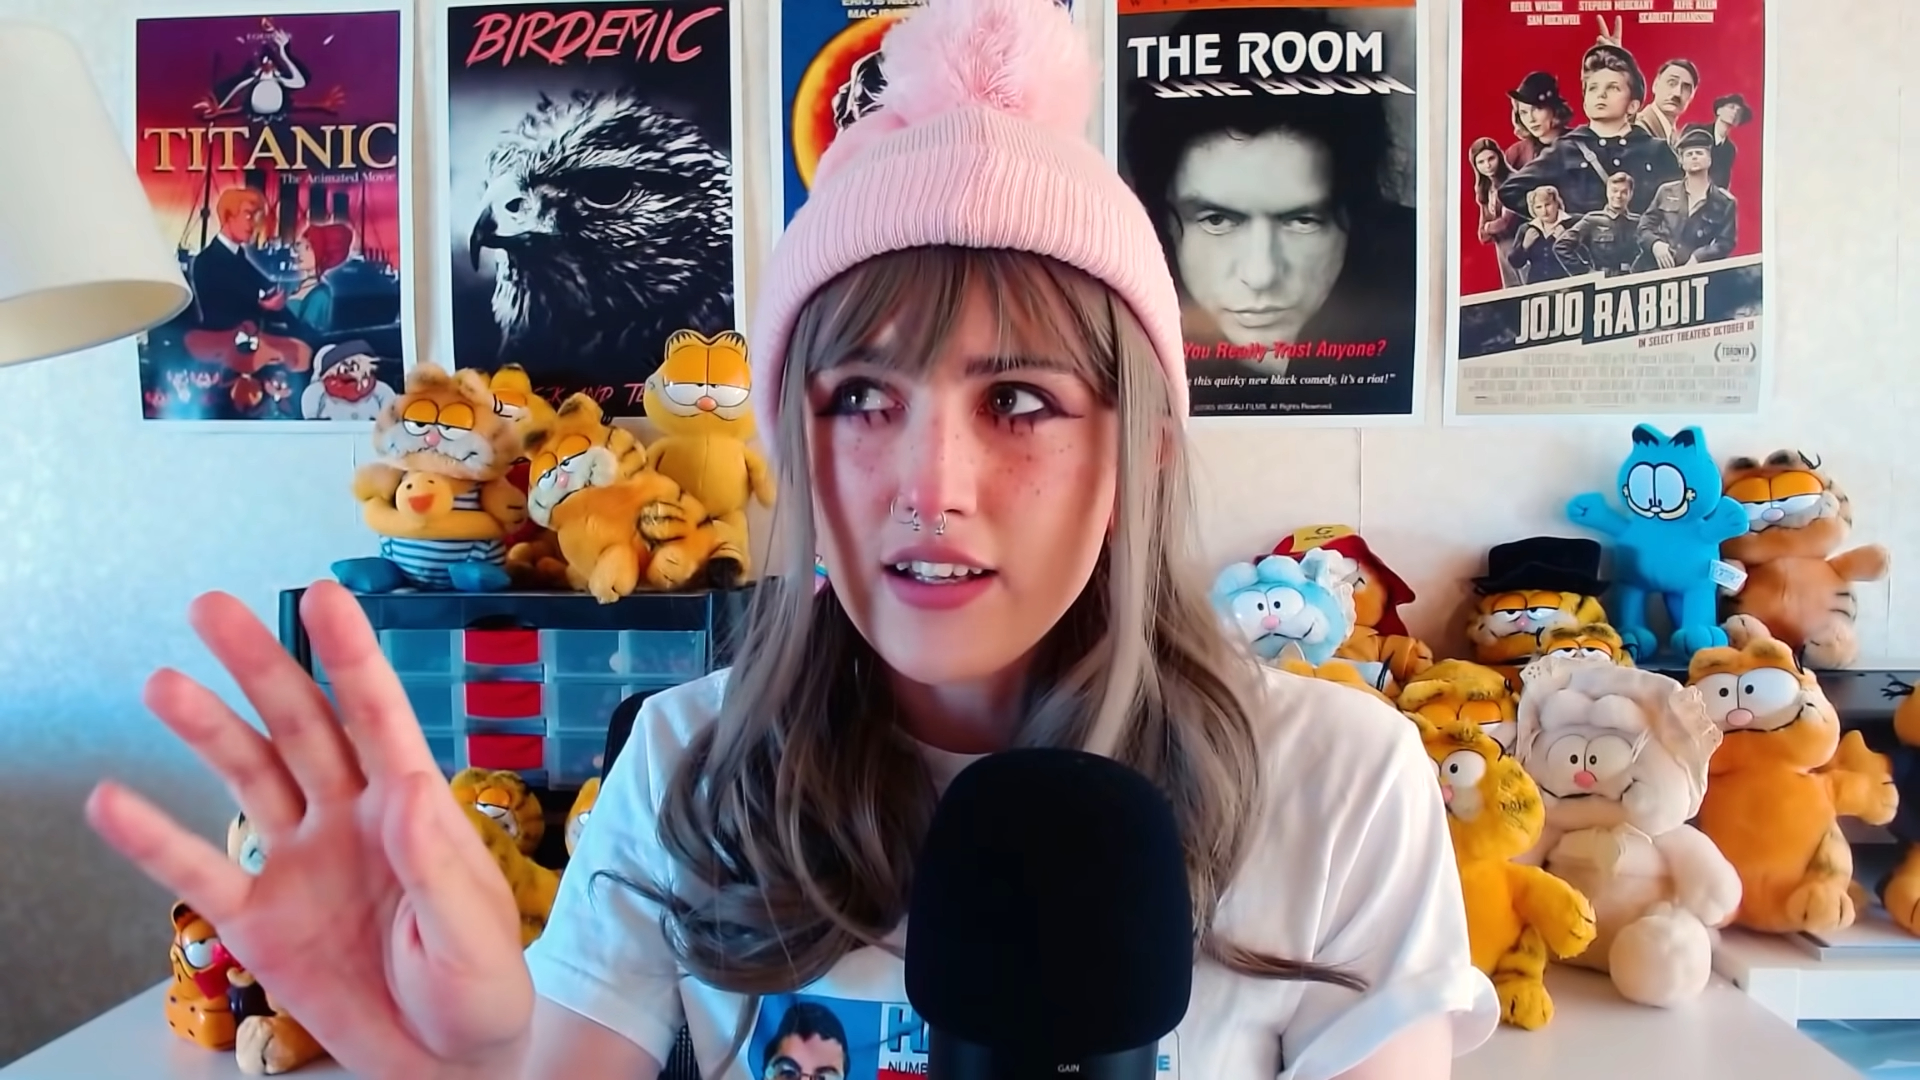 A young person wearing cute eye makeup and a pink beanie, looking to the left and holding up a hand, in a room with lots of Garfield plushies and some movie posters in the background.